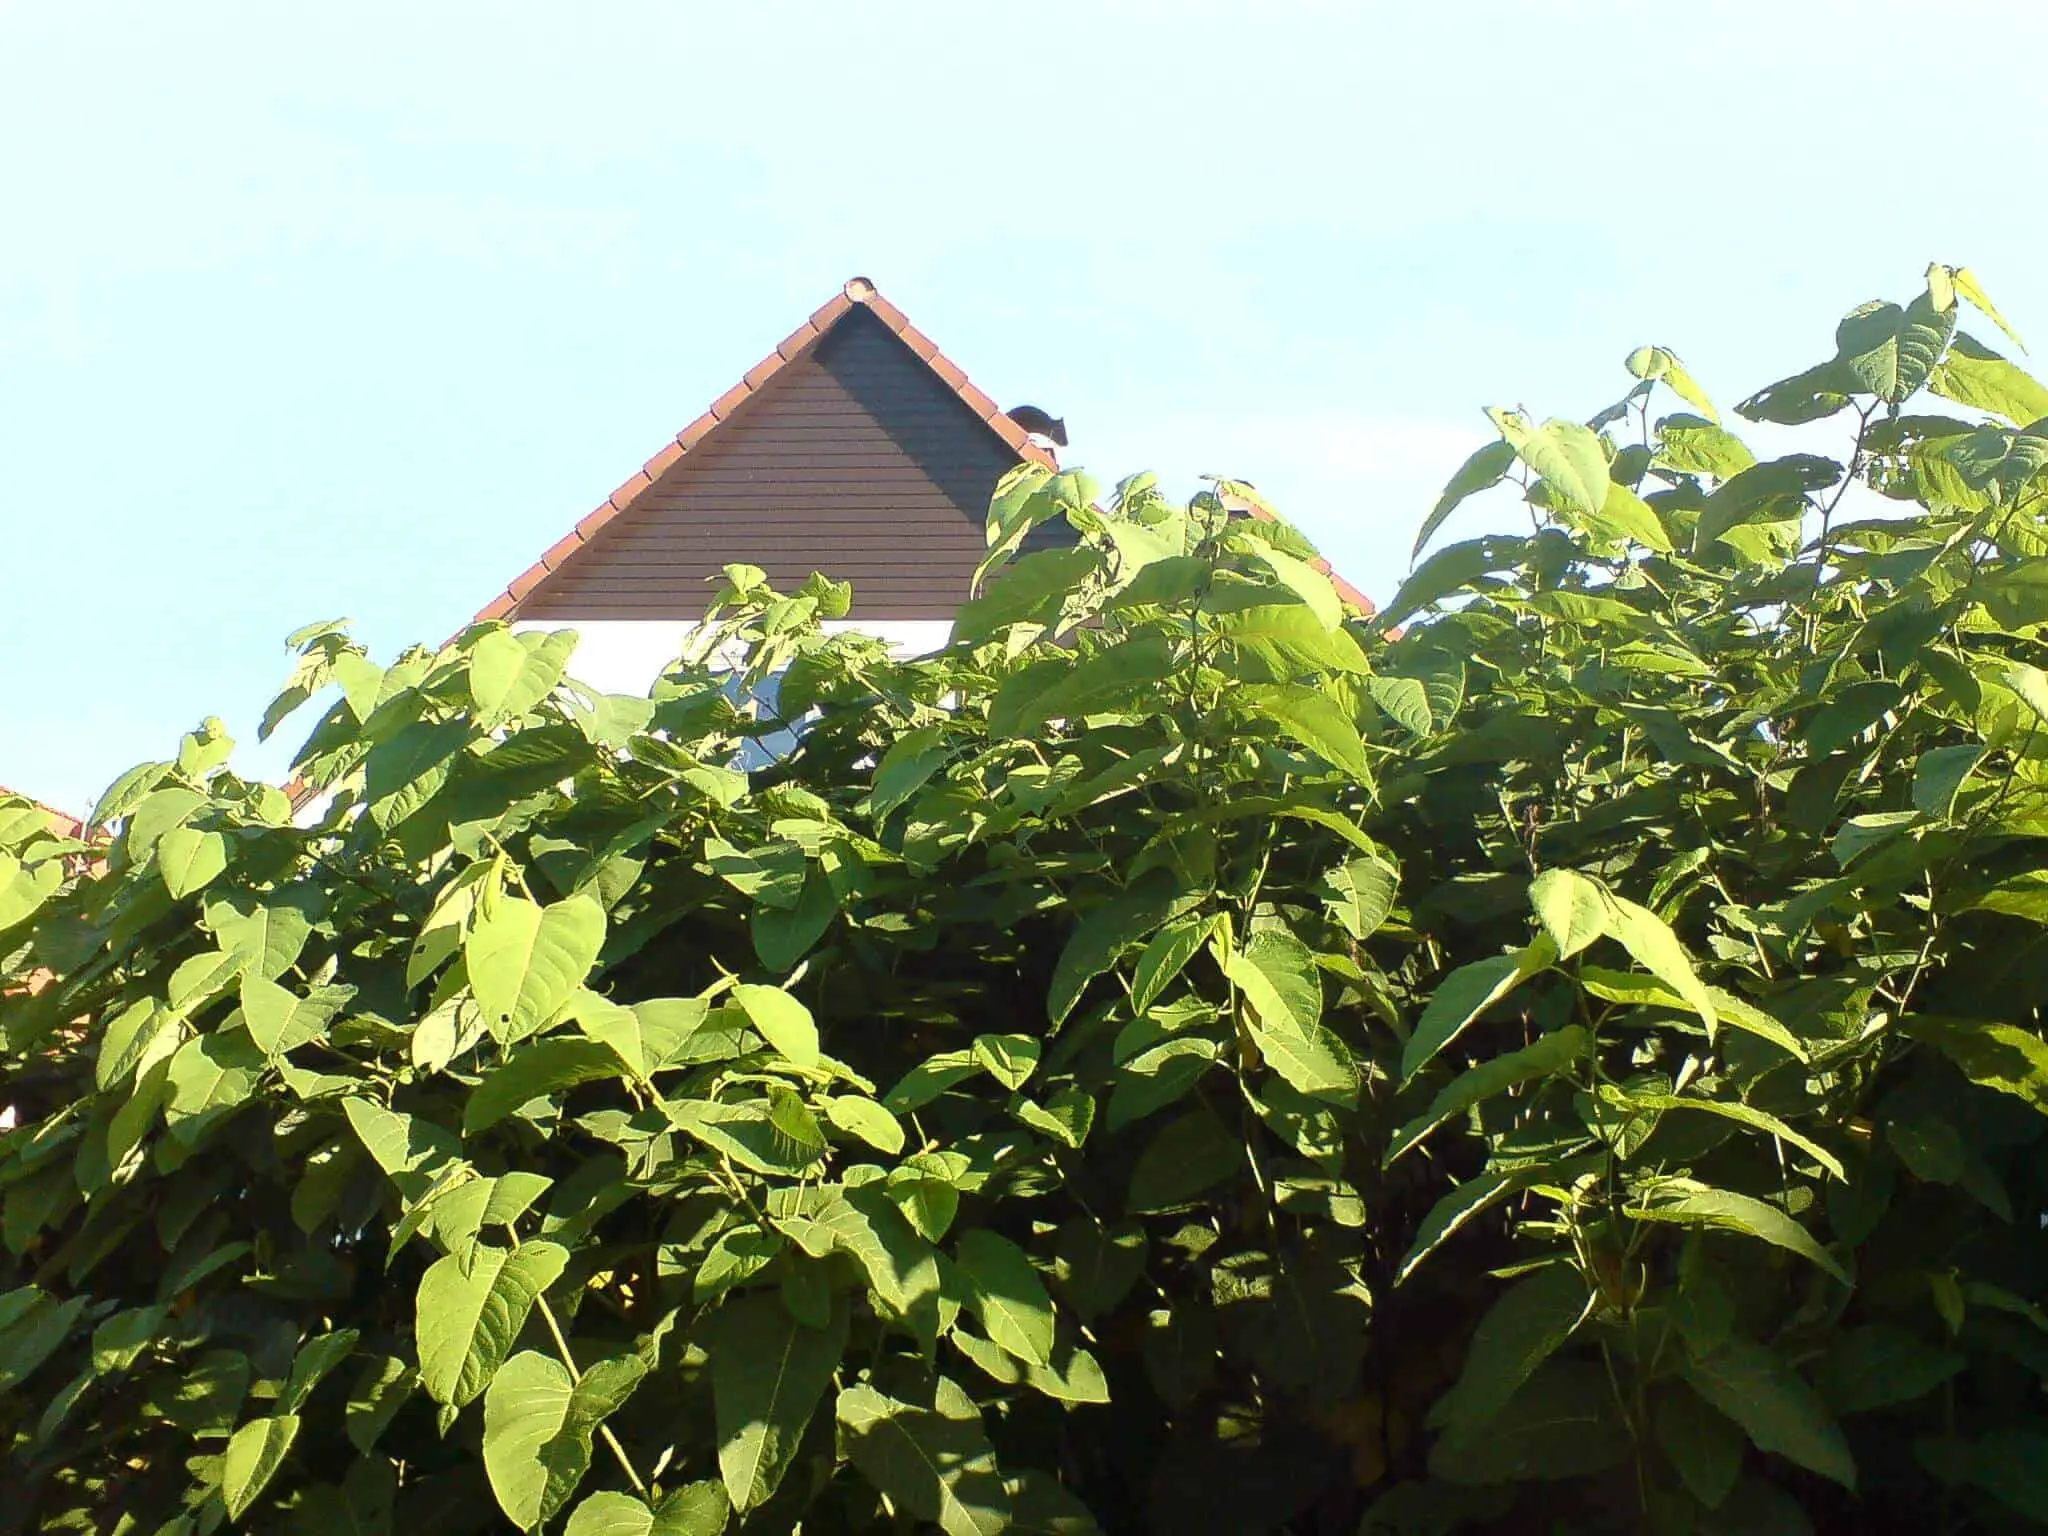 Will Japanese Knotweed Devalue My House? Yes if left unattended and not treated